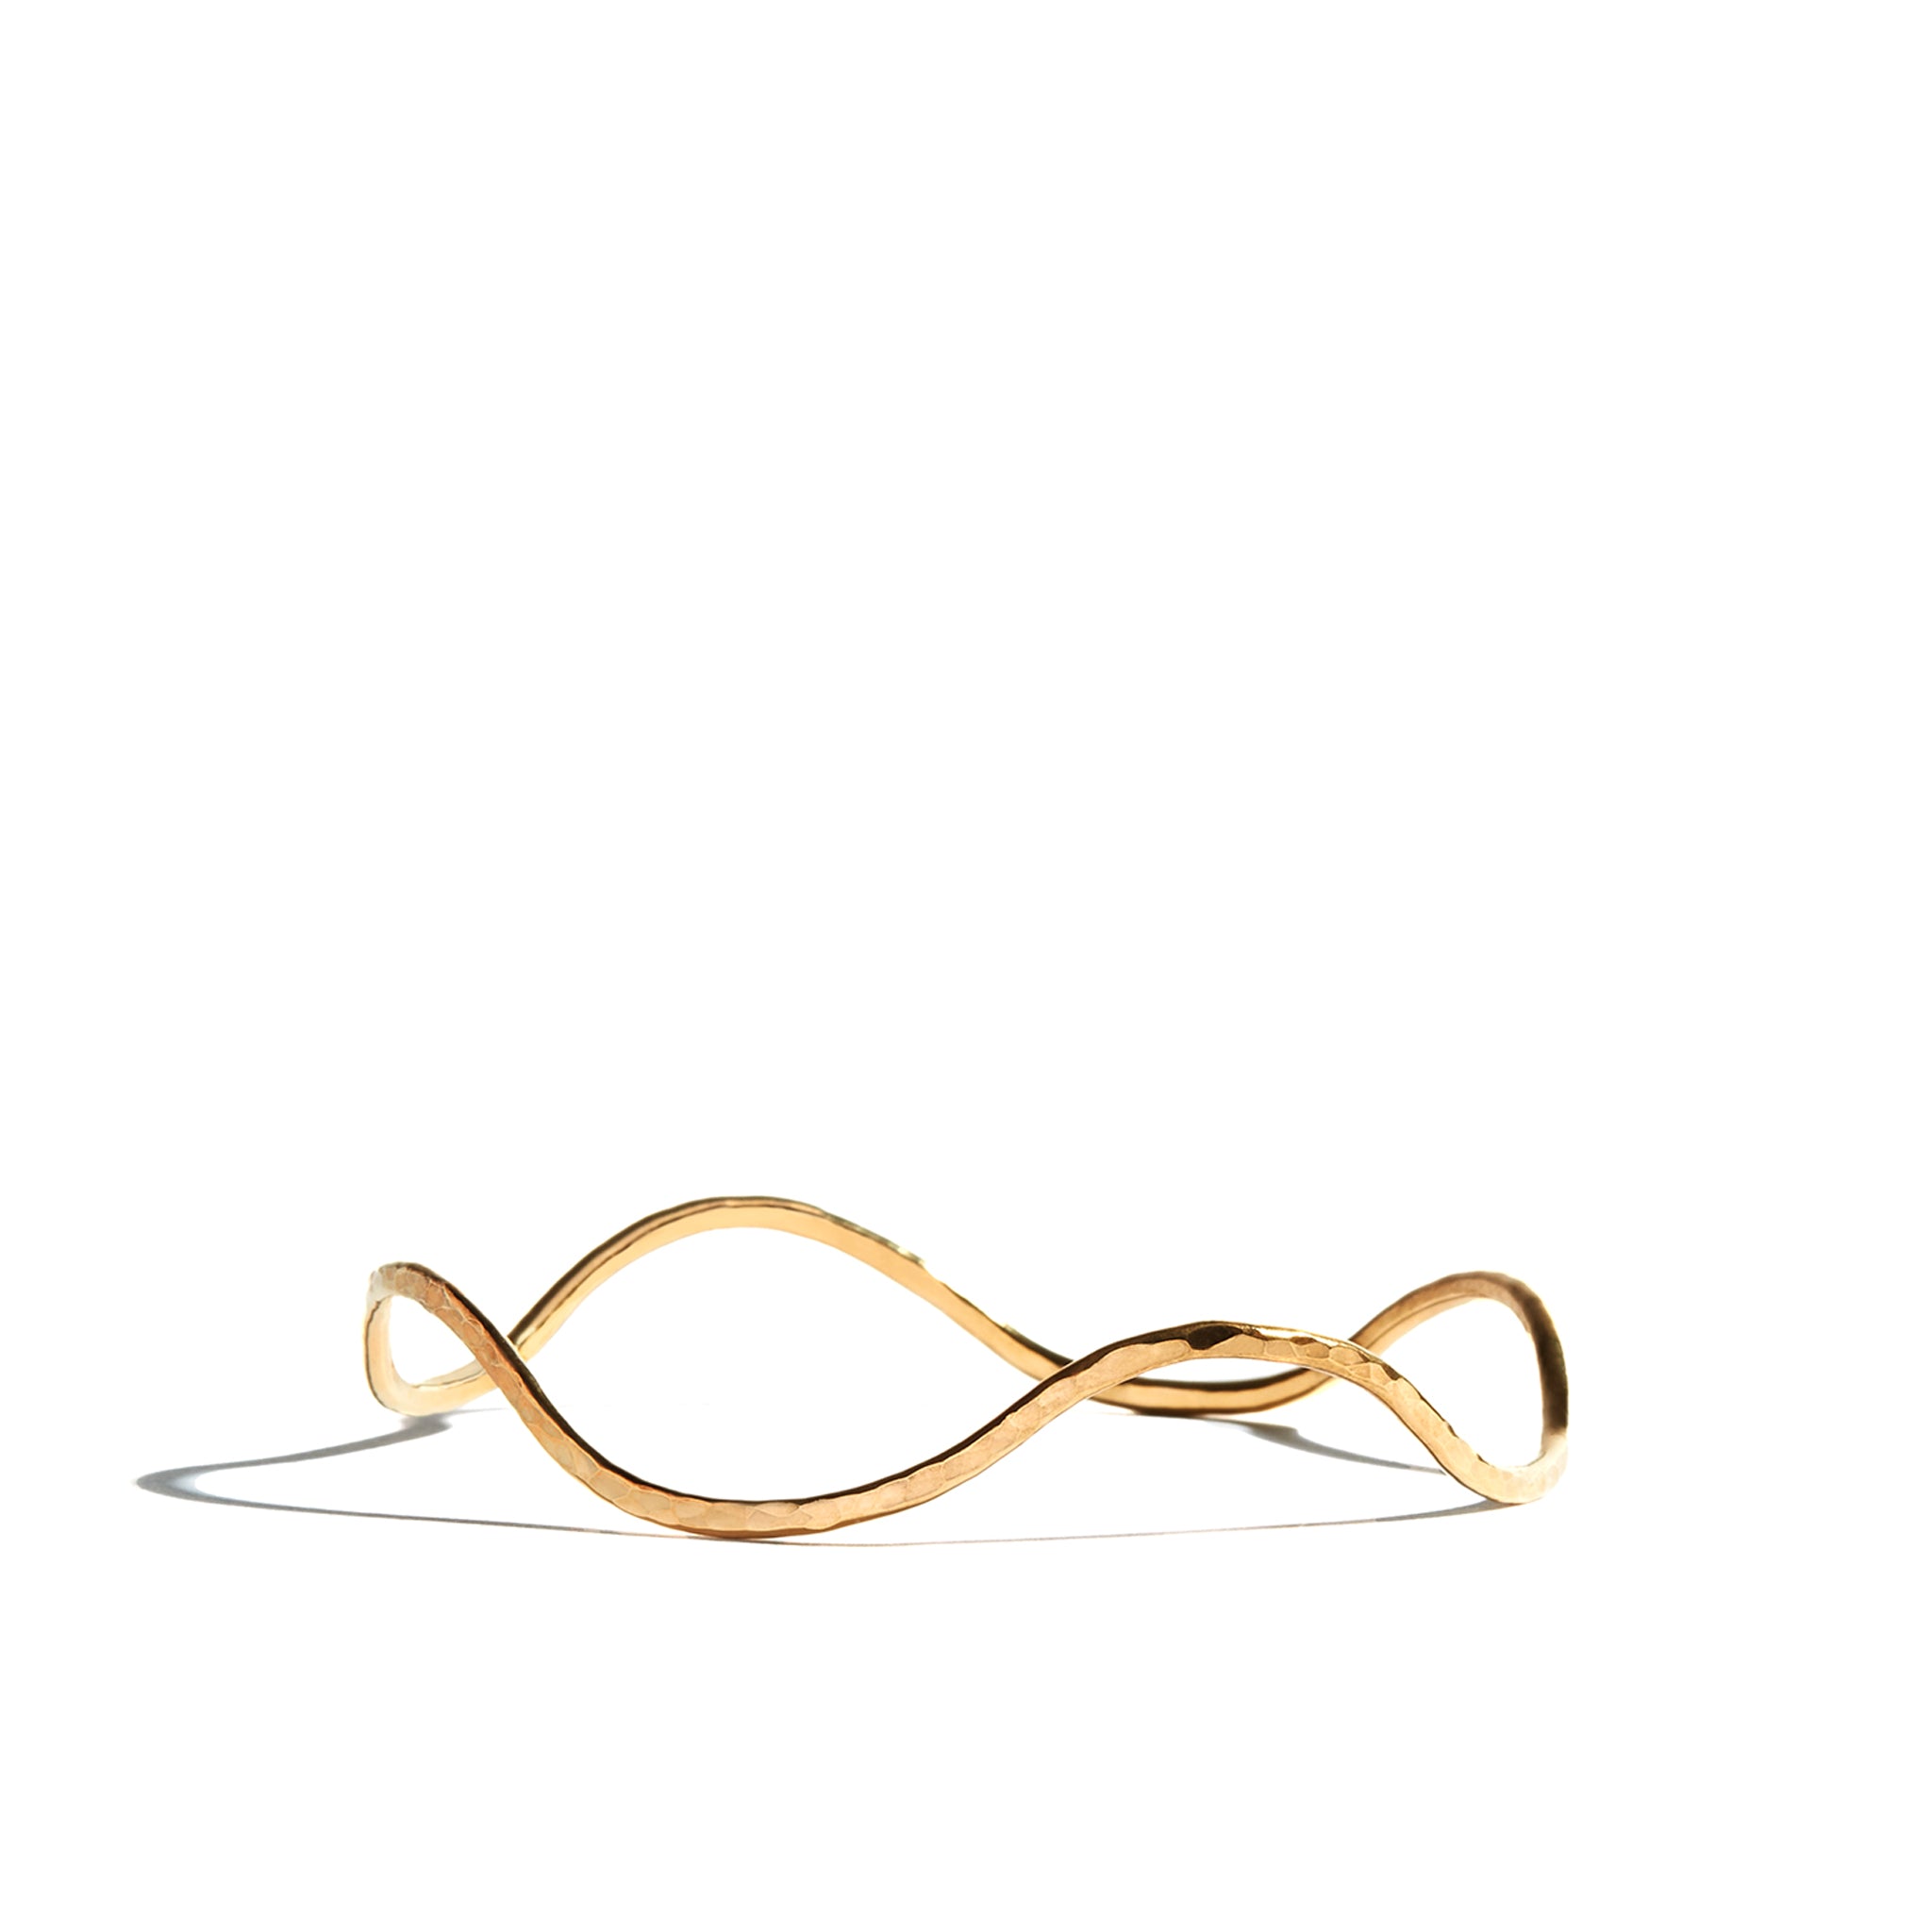 A stylish twisty hand-hammered bangle crafted from 14ct gold fill, perfect for adding a touch of flair to any outfit. Perfect for stacking your pieces.